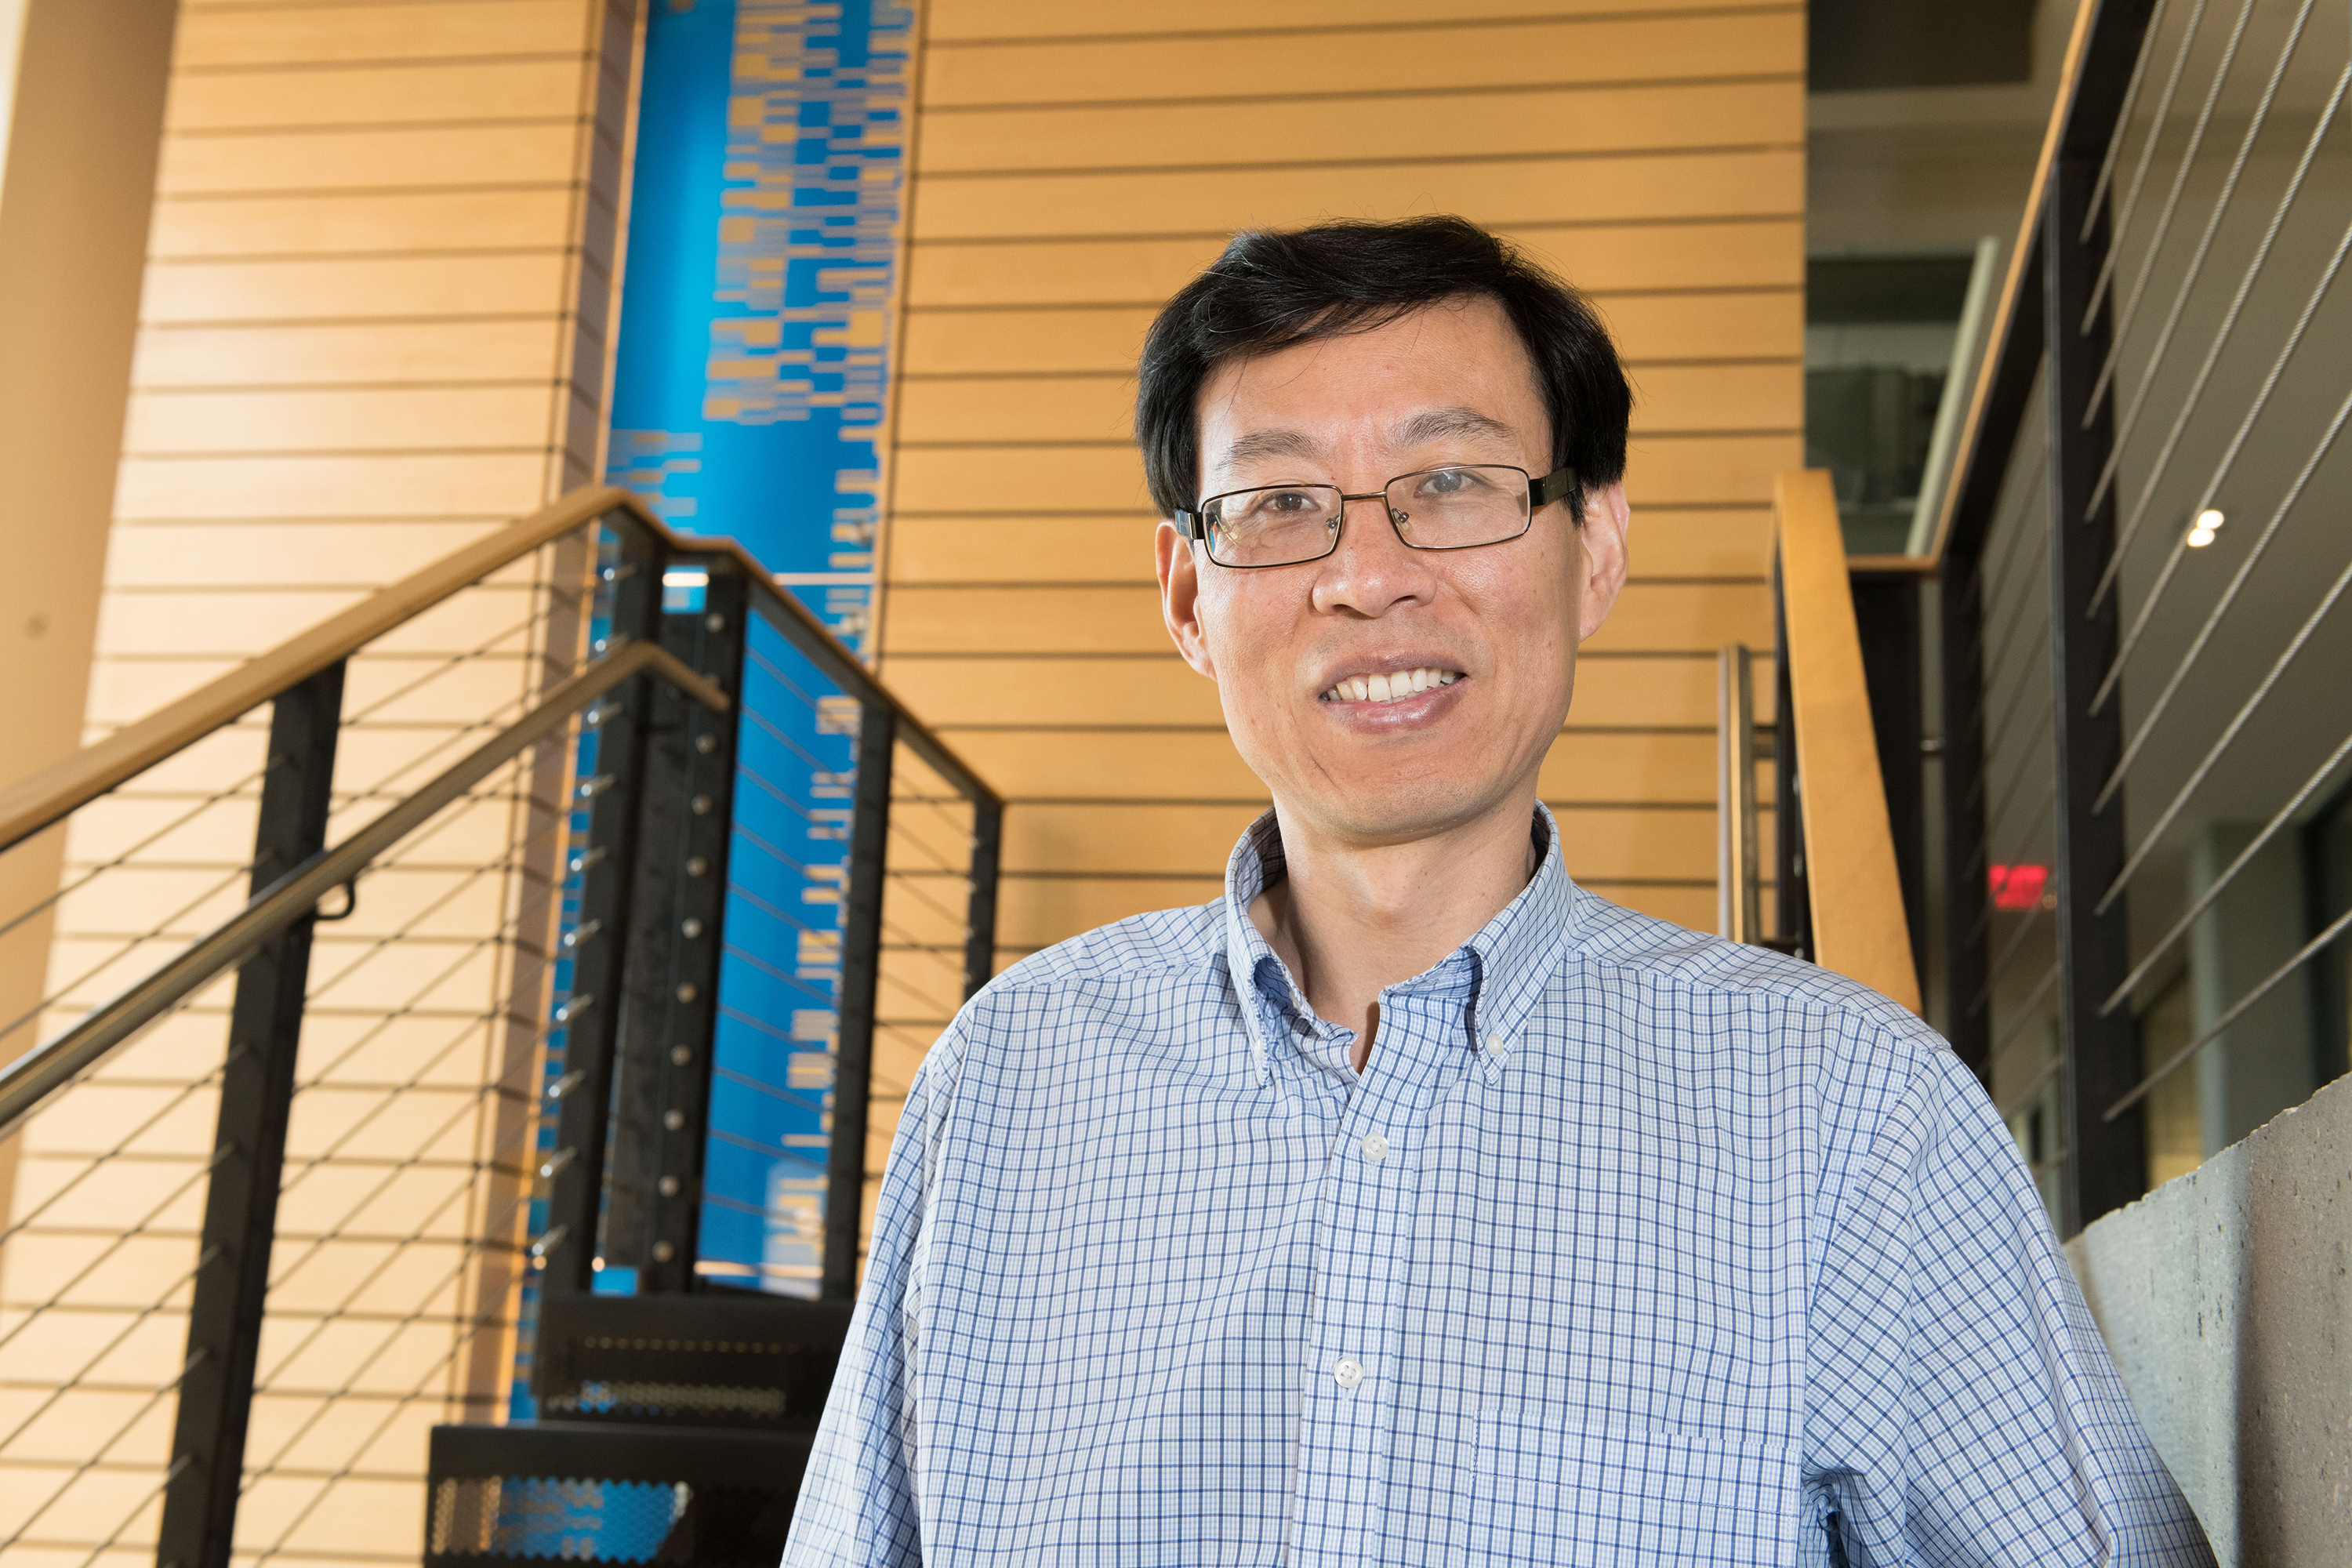 Professor Ronghu Wu from the School of Chemistry and Biochemistry is seen here in the Engineered Biosciences Building at Georgia Tech. Credit: Georgia Tech / Allison Carter